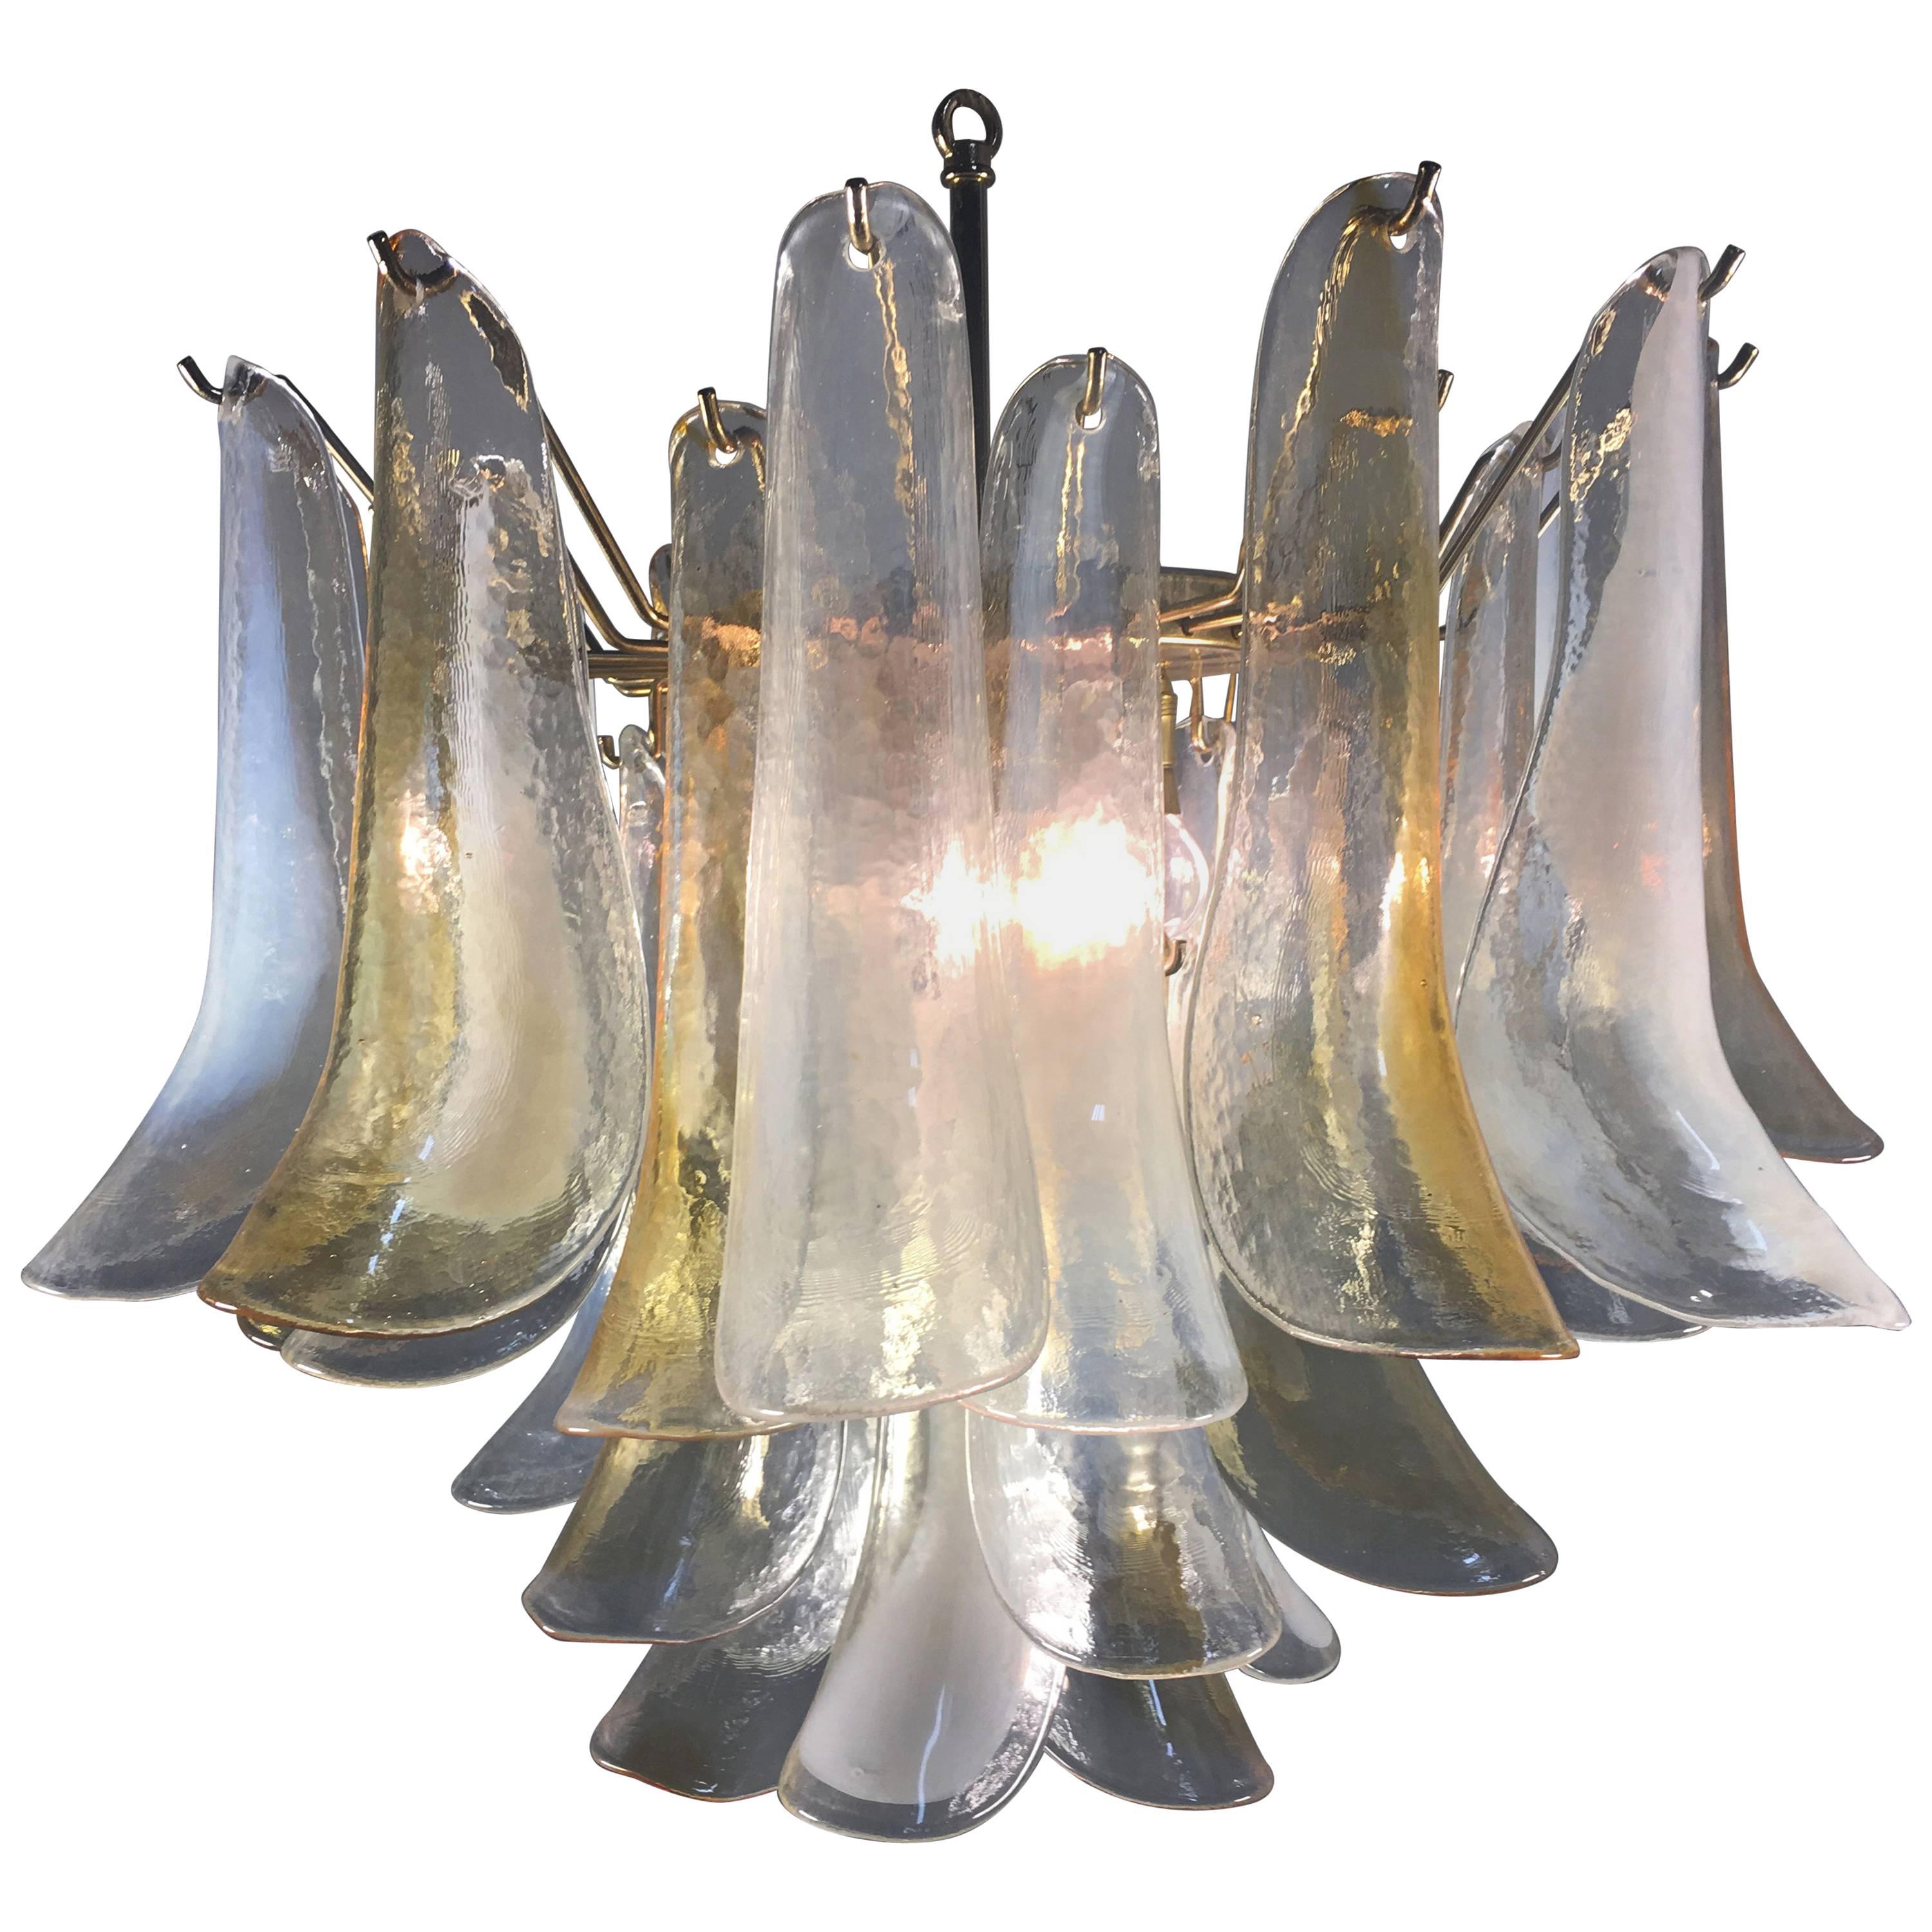 Elegant Pair of Chandeliers White and Amber Petals, Murano, 1990s For Sale 5